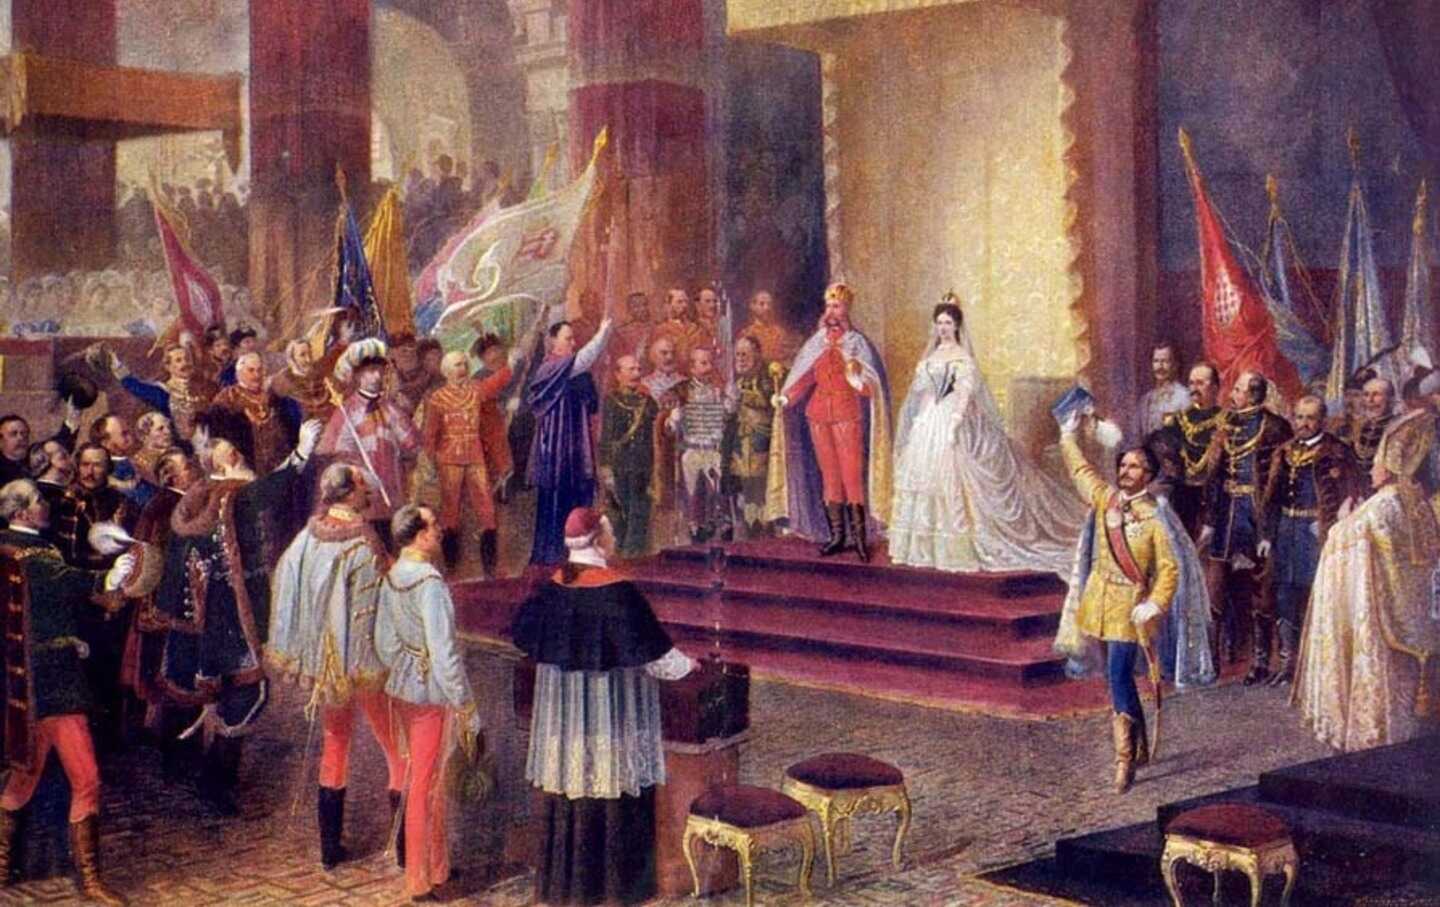 The coronation of Emperor Franz Joseph and Empress Elisabeth of Austria as King and Queen of Hungary, on June 8, 1867, in Buda, the capital of Hungary.